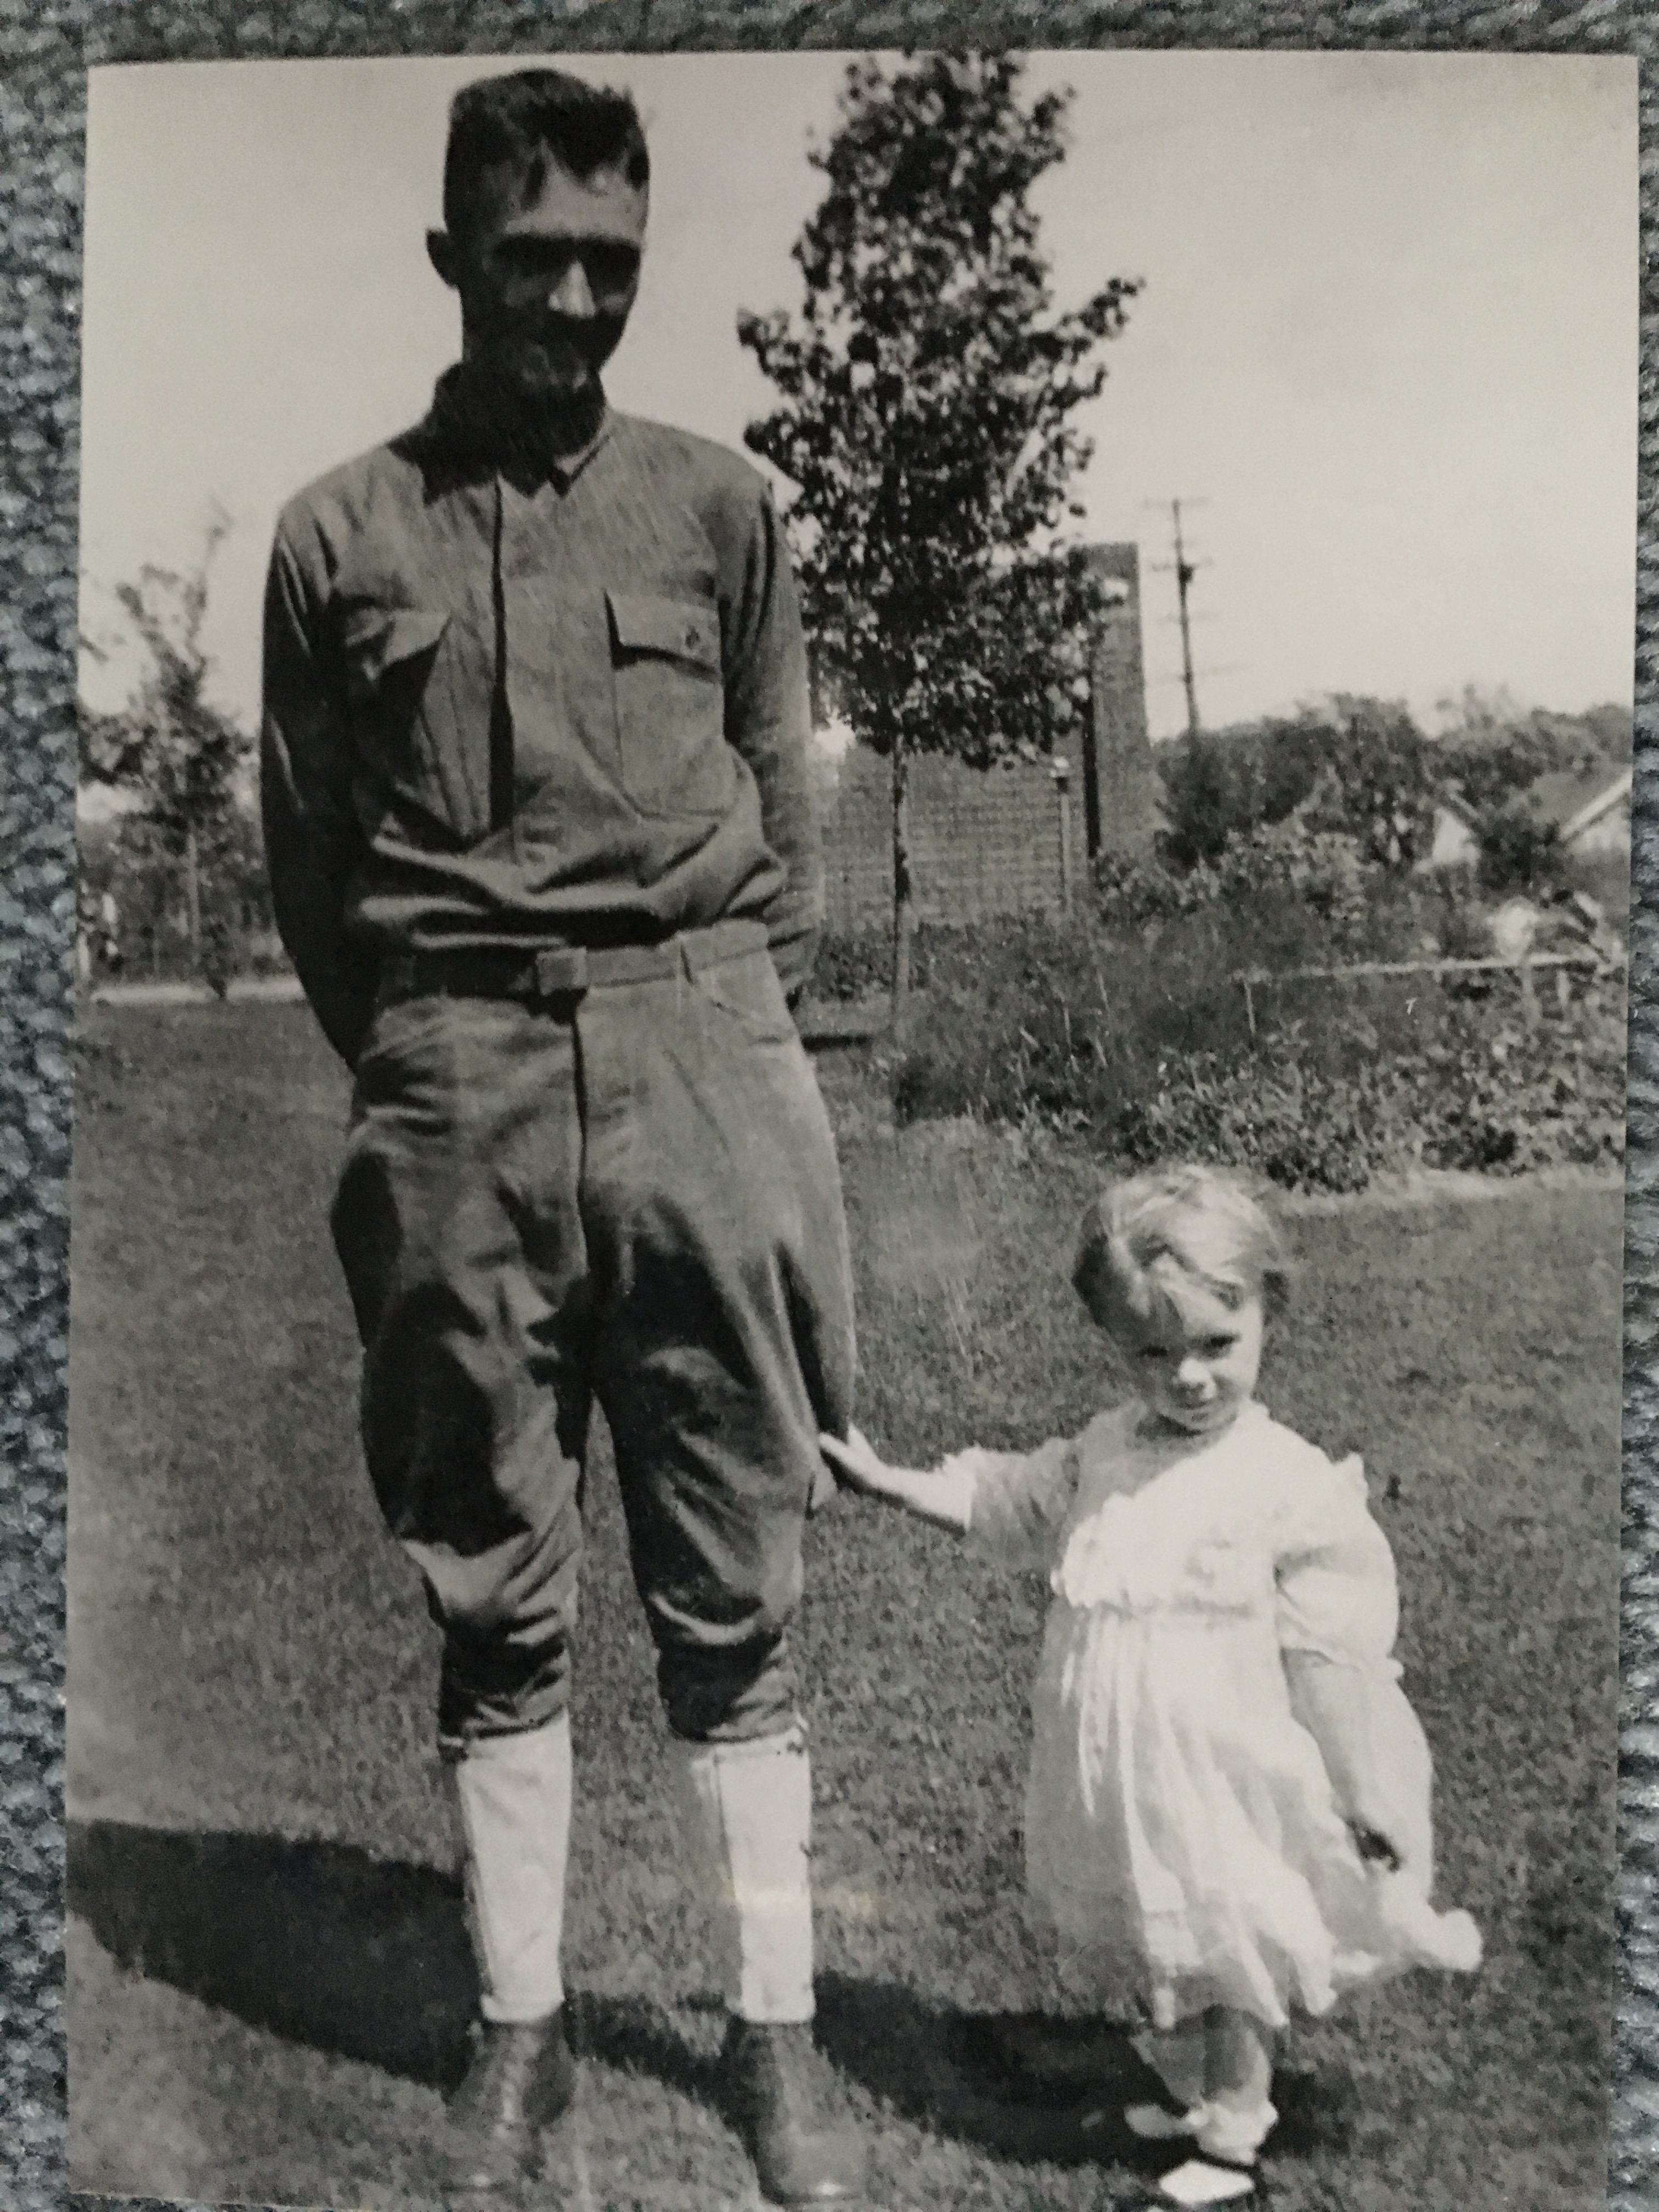 WWI-era photograph of brother & sister - Harry and Mildred Gross.